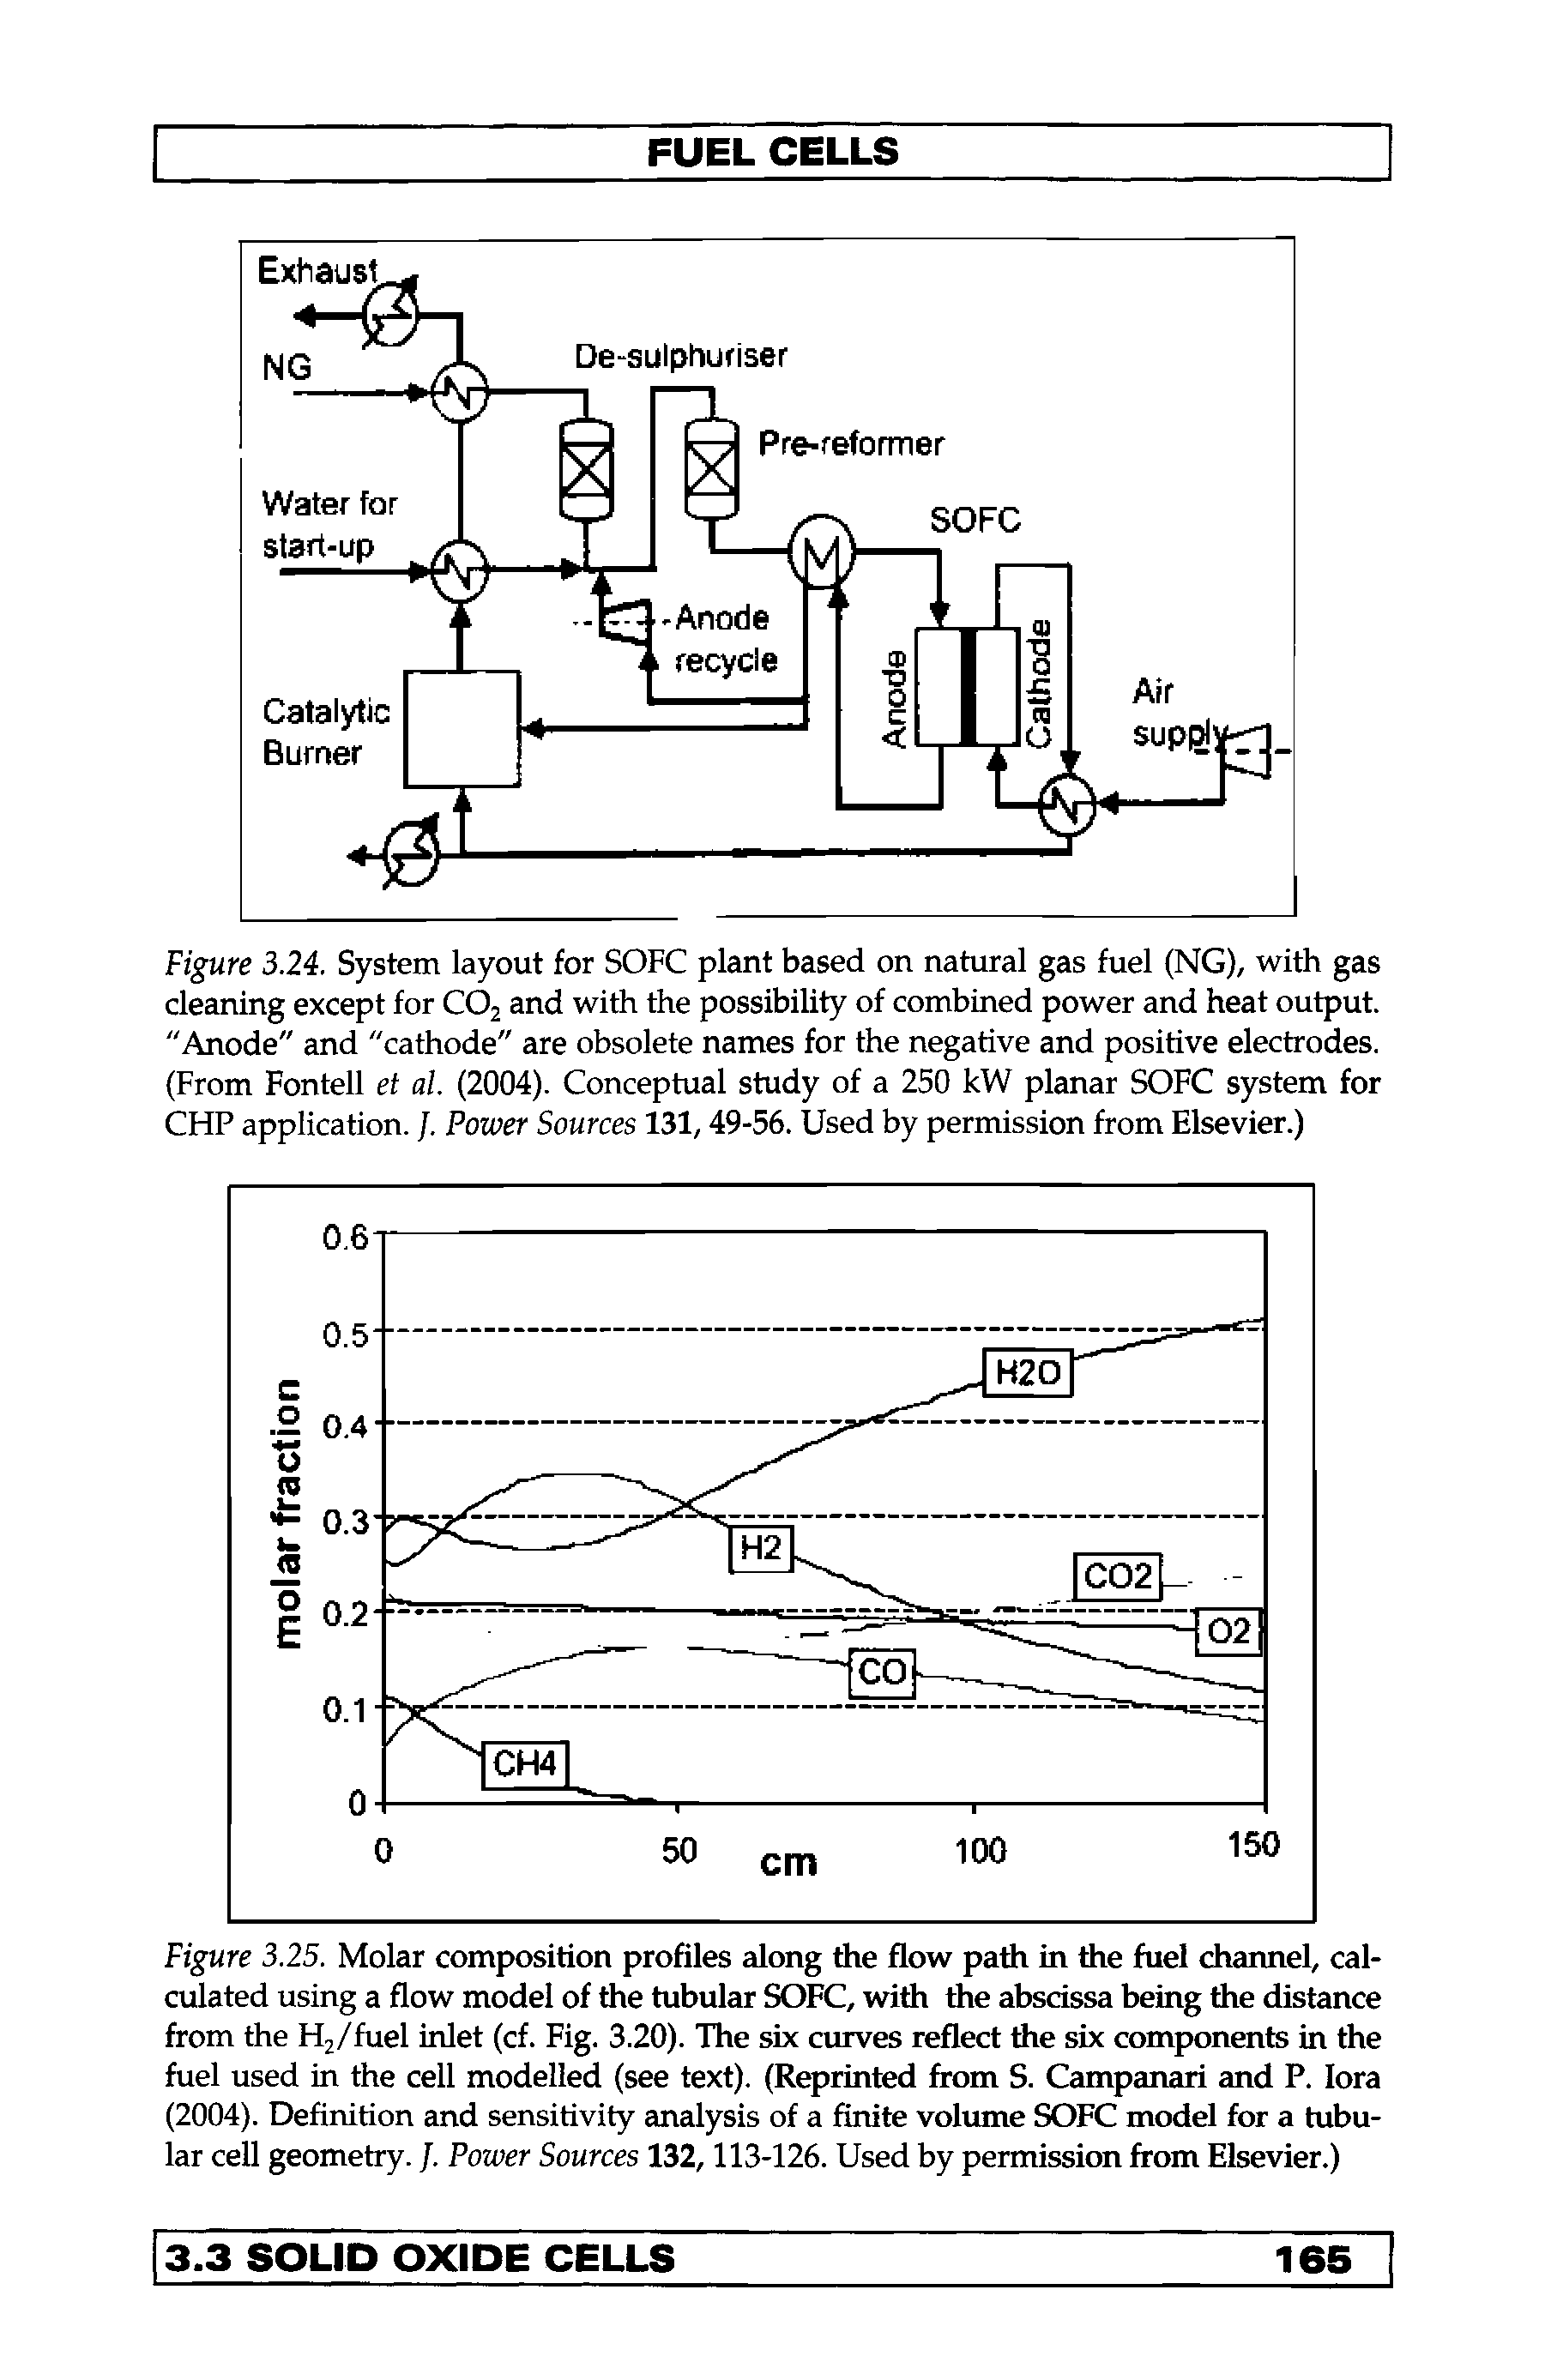 Figure 3.24. System layout for SOFC plant based on natural gas fuel (NG), with gas cleaning except for CO2 and with the possibility of combined power and heat output. "Anode" and "cathode" are obsolete names for the negative and positive electrodes. (From Fontell et al. (2004). Conceptual study of a 250 kW planar SOFC system for CHP application. /. Power Sources 131,49-56. Used by permission from Elsevier.)...